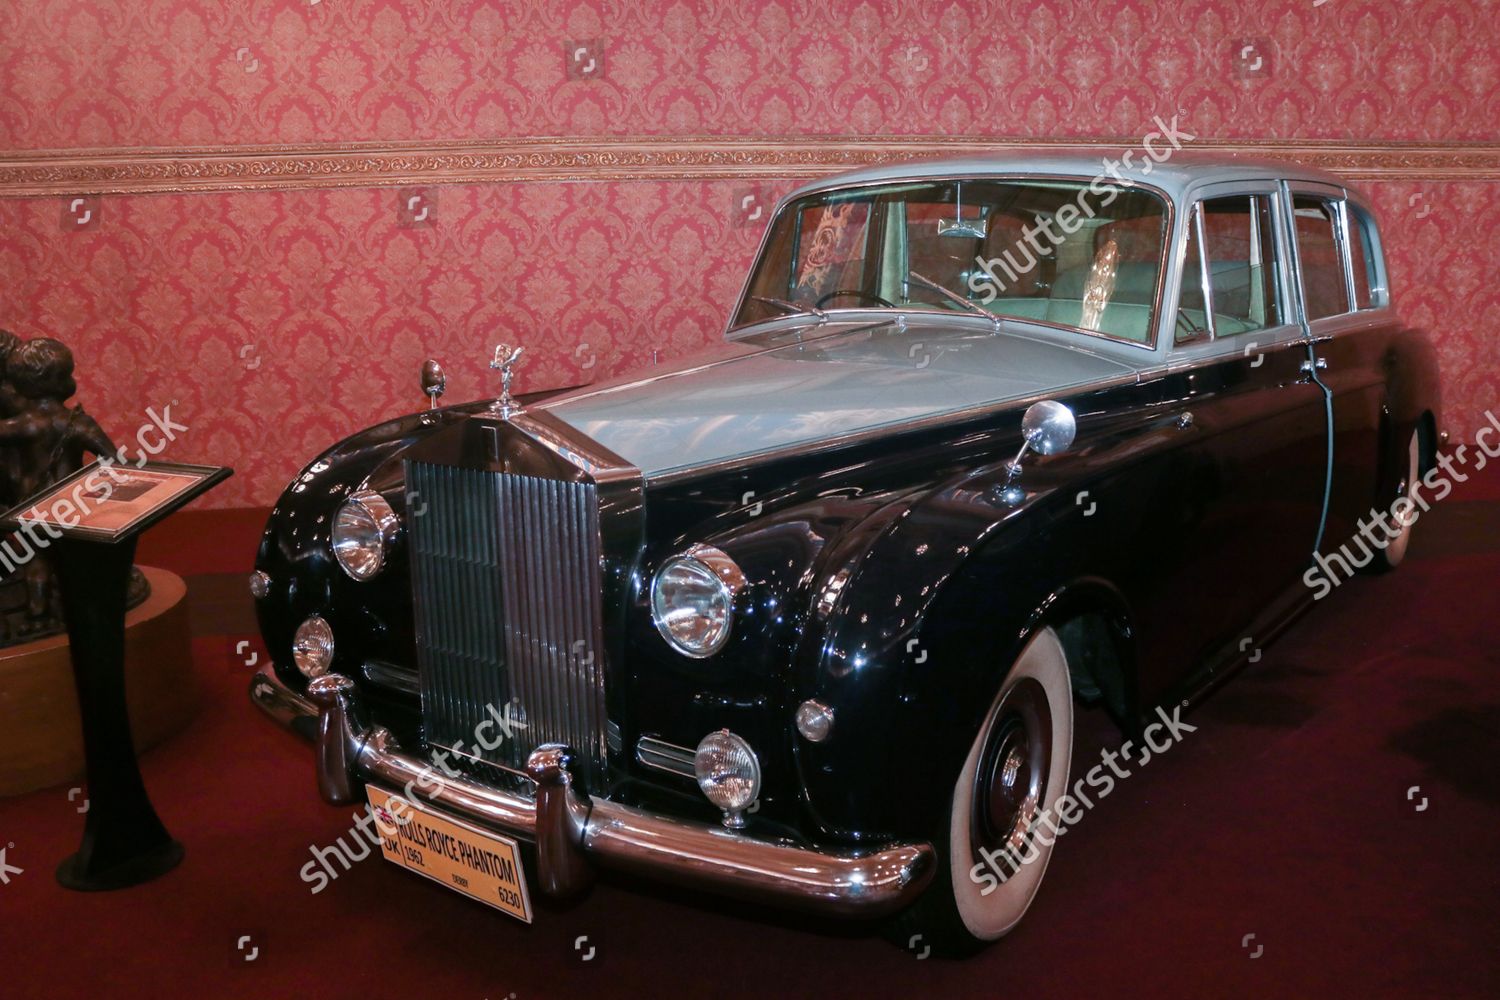 Heres A Quick Look At Her Majesty Queen Elizabeth II Car Collection